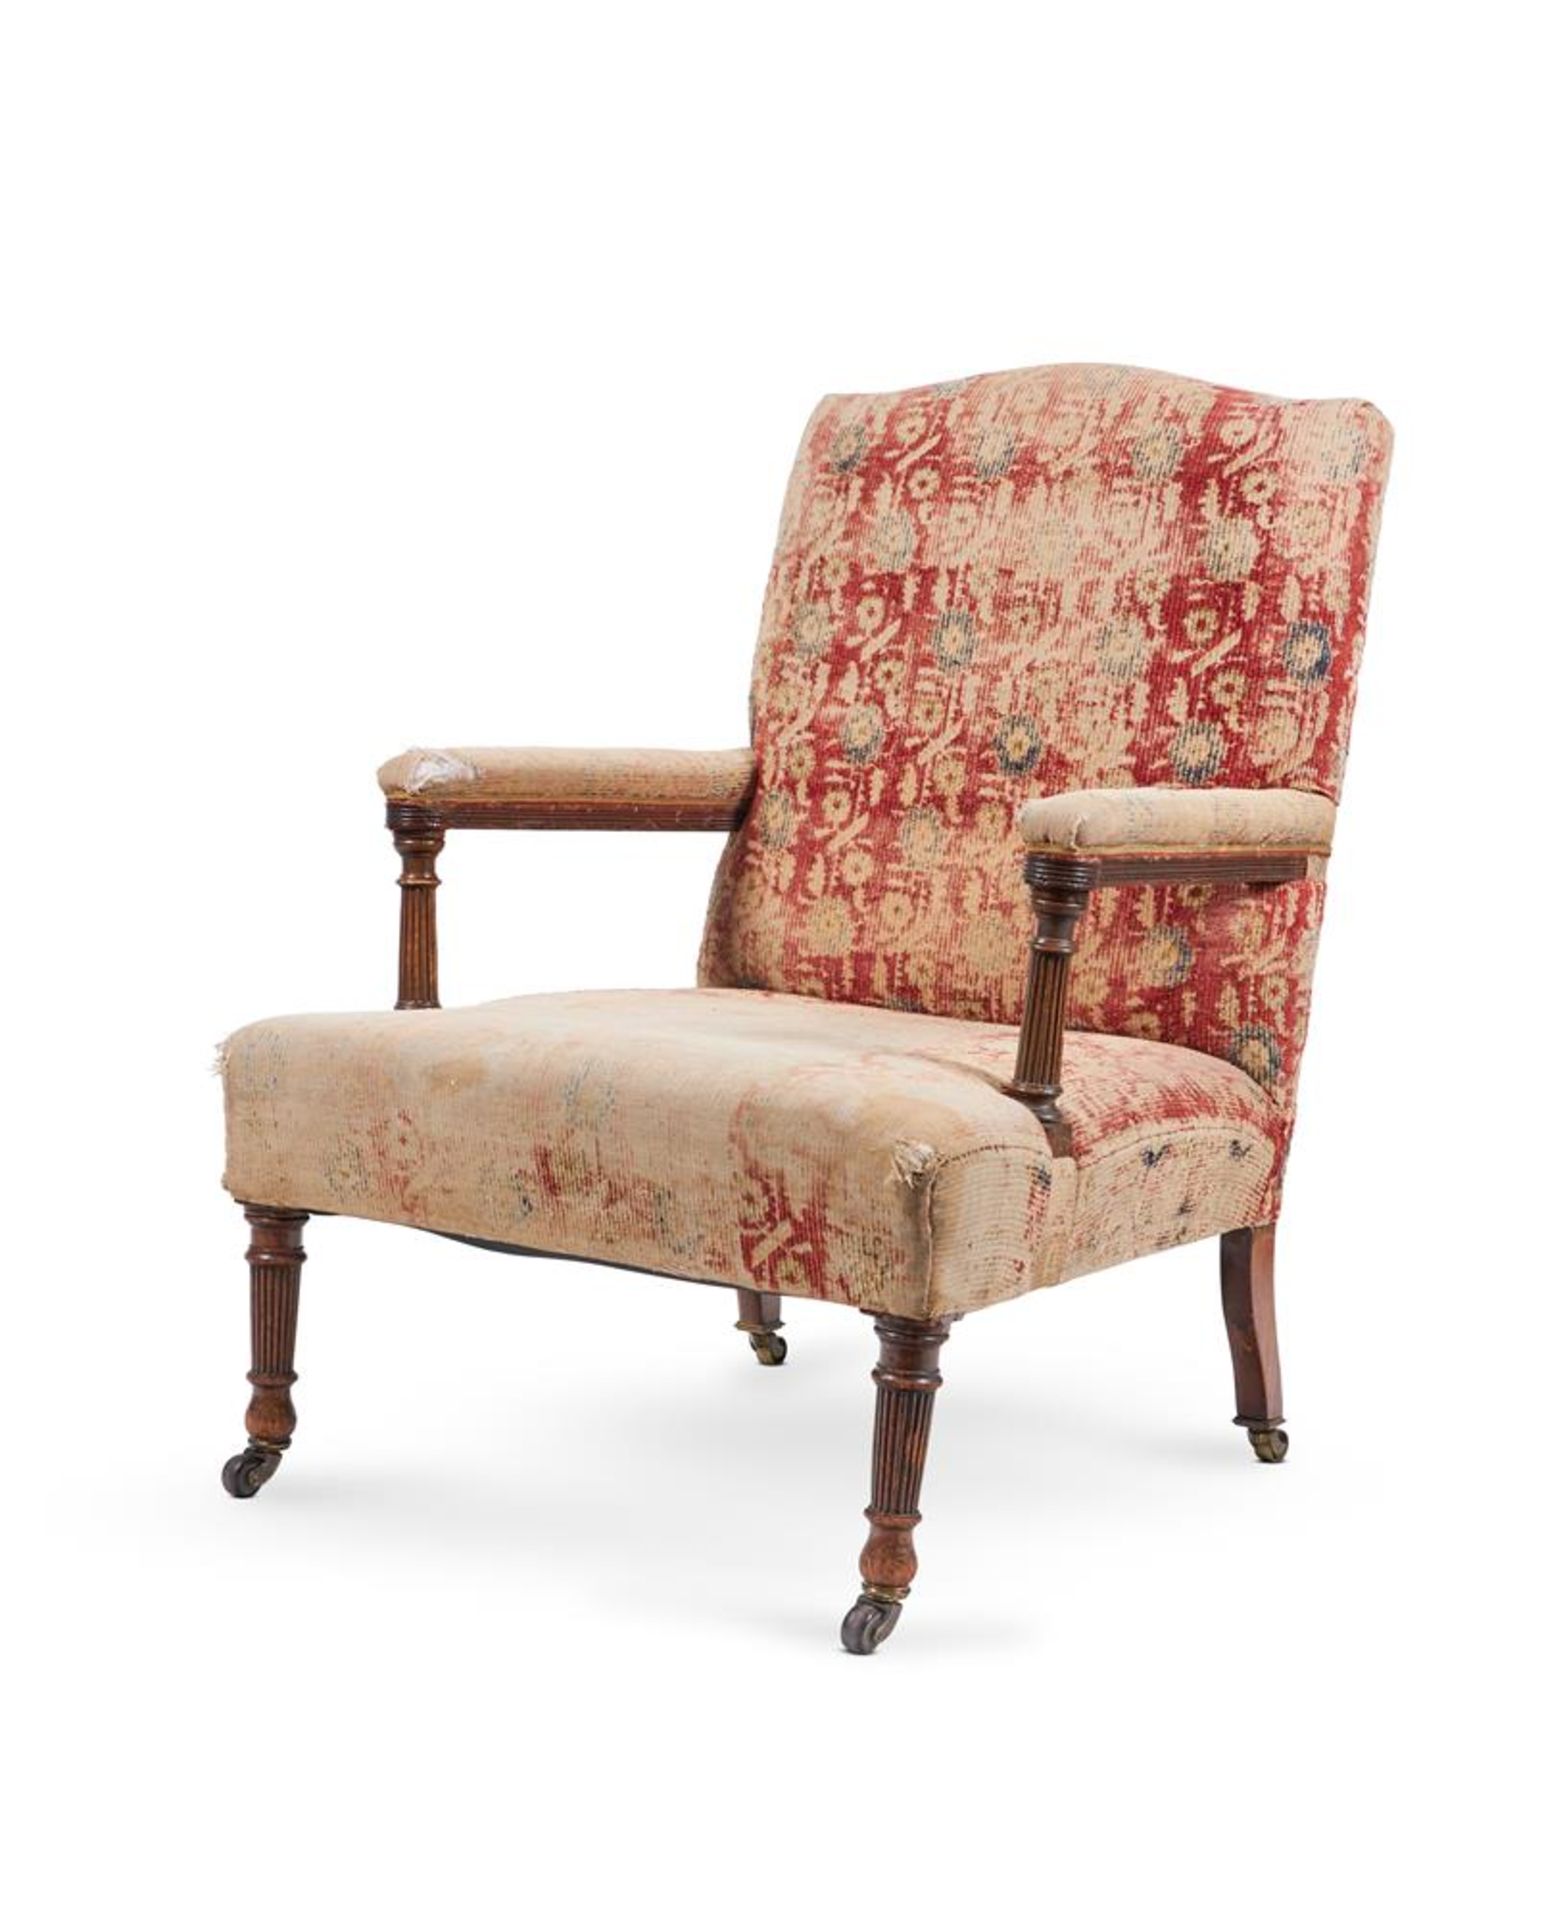 A VICTORIAN MAHOGANY OPEN ARMCHAIR, LATE 19TH CENTURY - Image 2 of 4